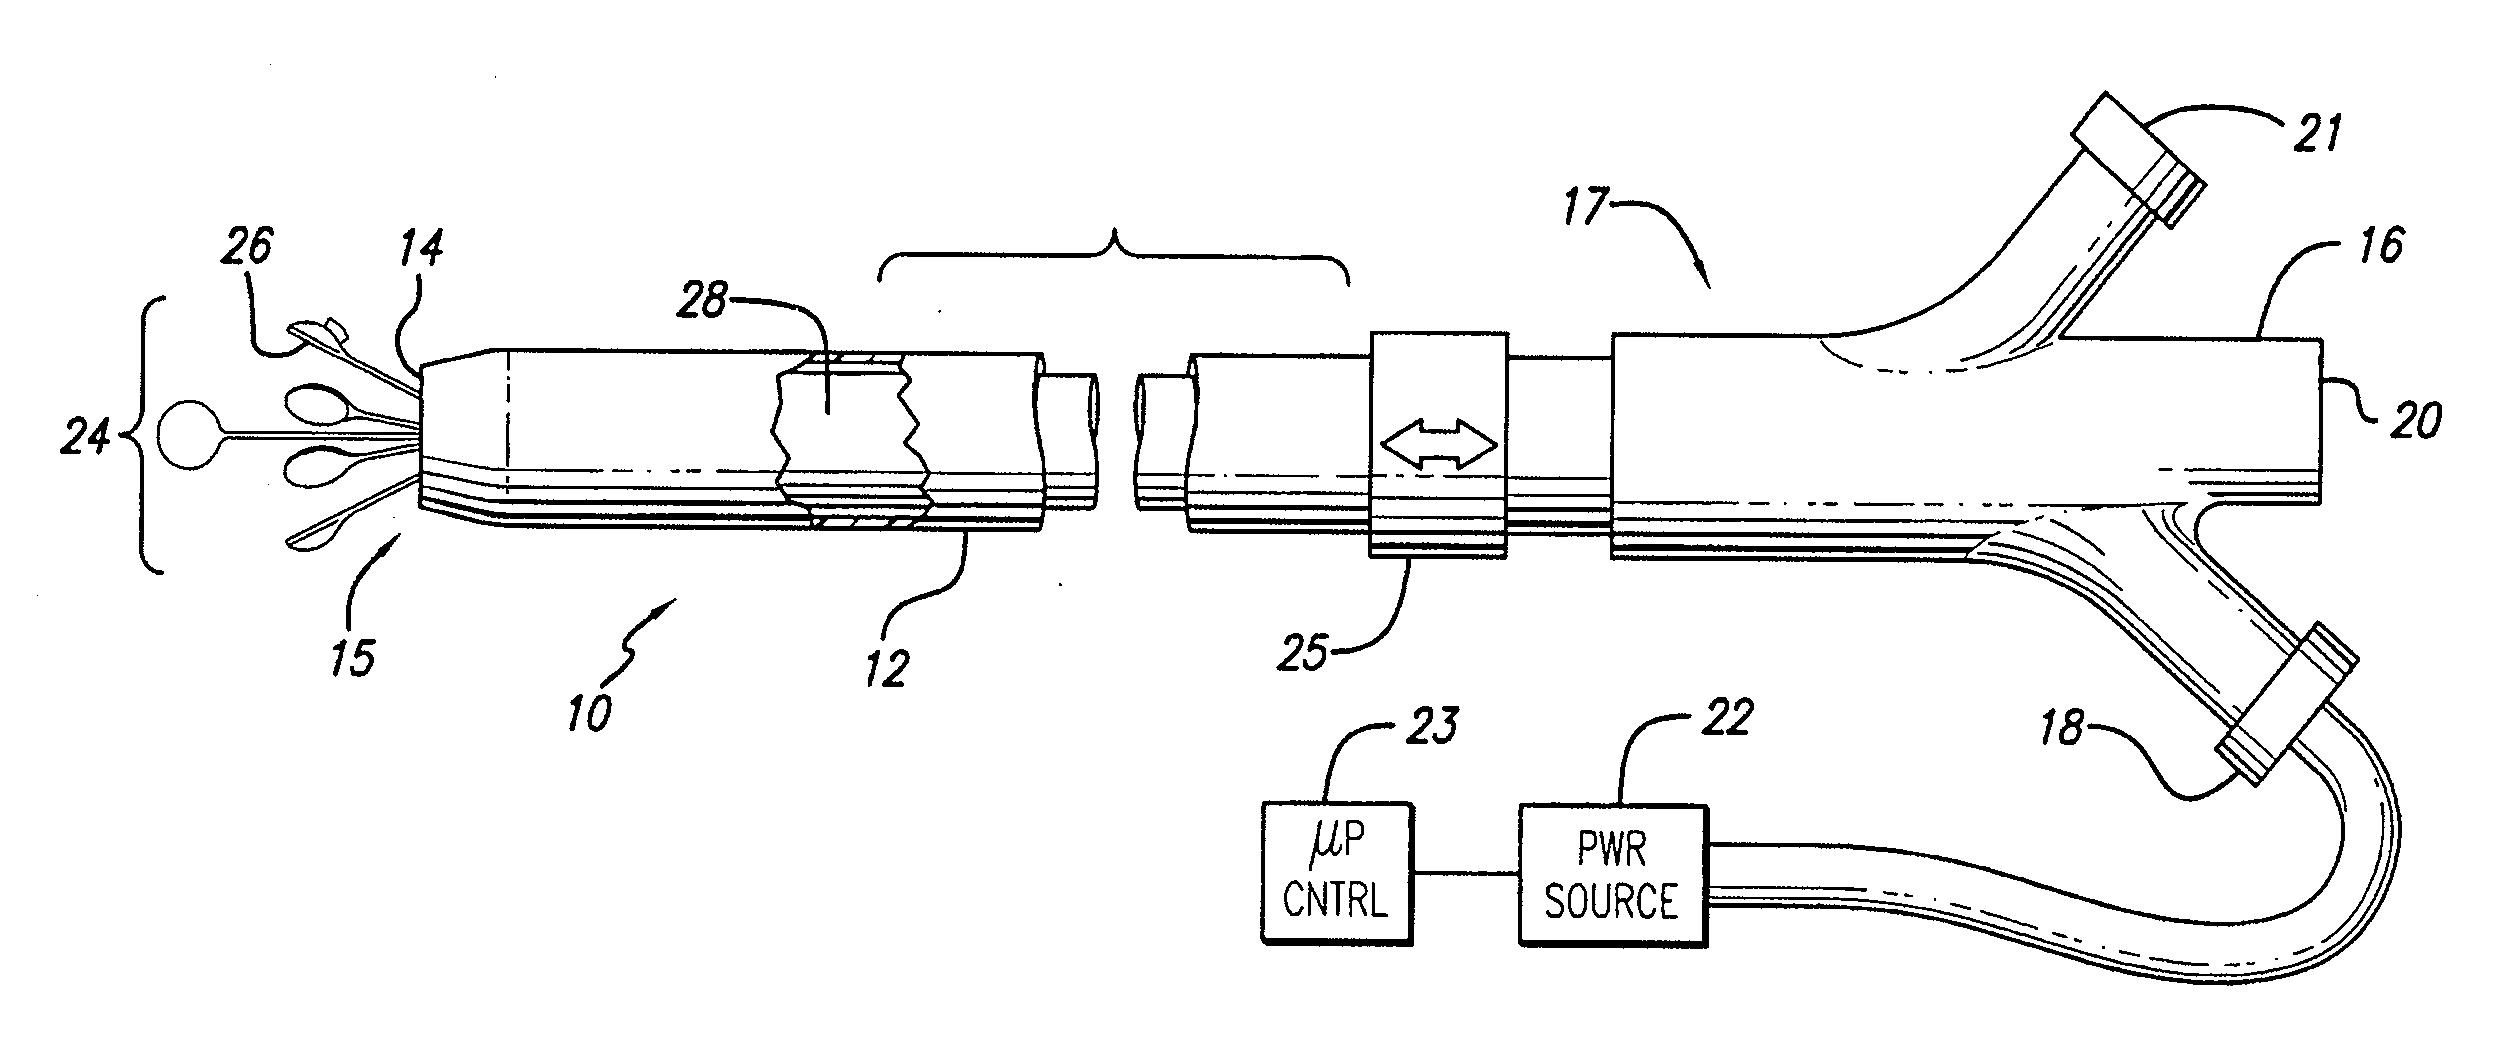 Expandable catheter having two sets of electrodes